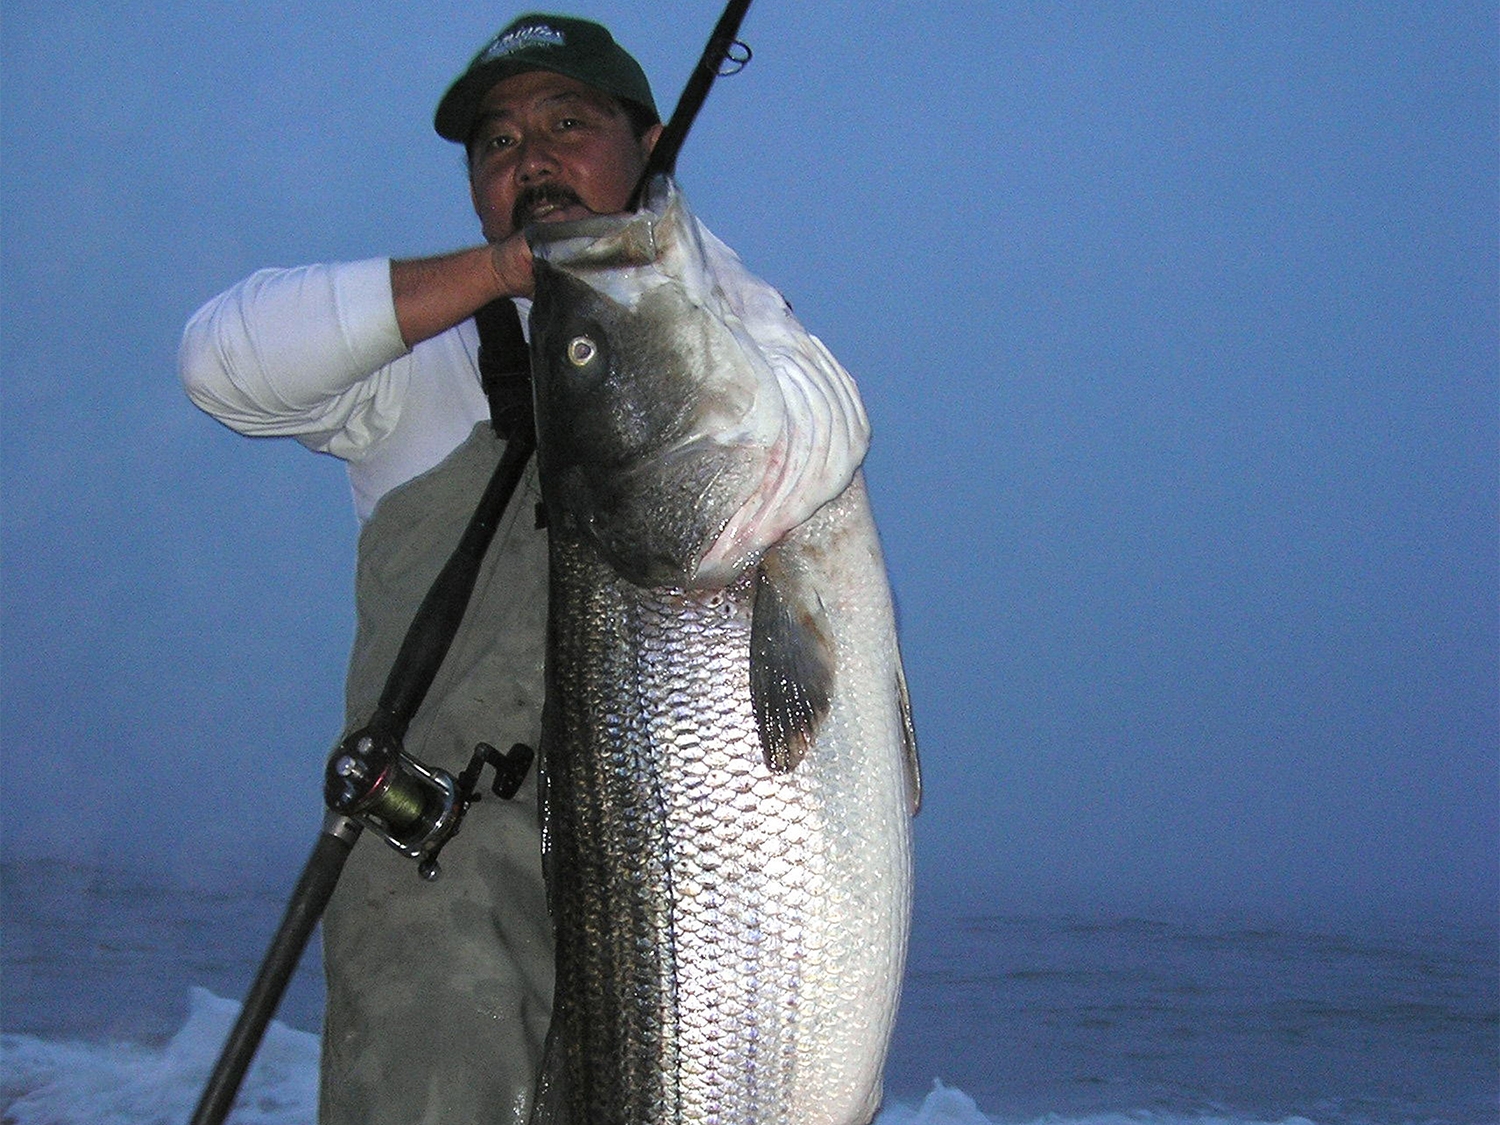 MA Fishermen are Struggling to Catch Stripers - Does That Mean We